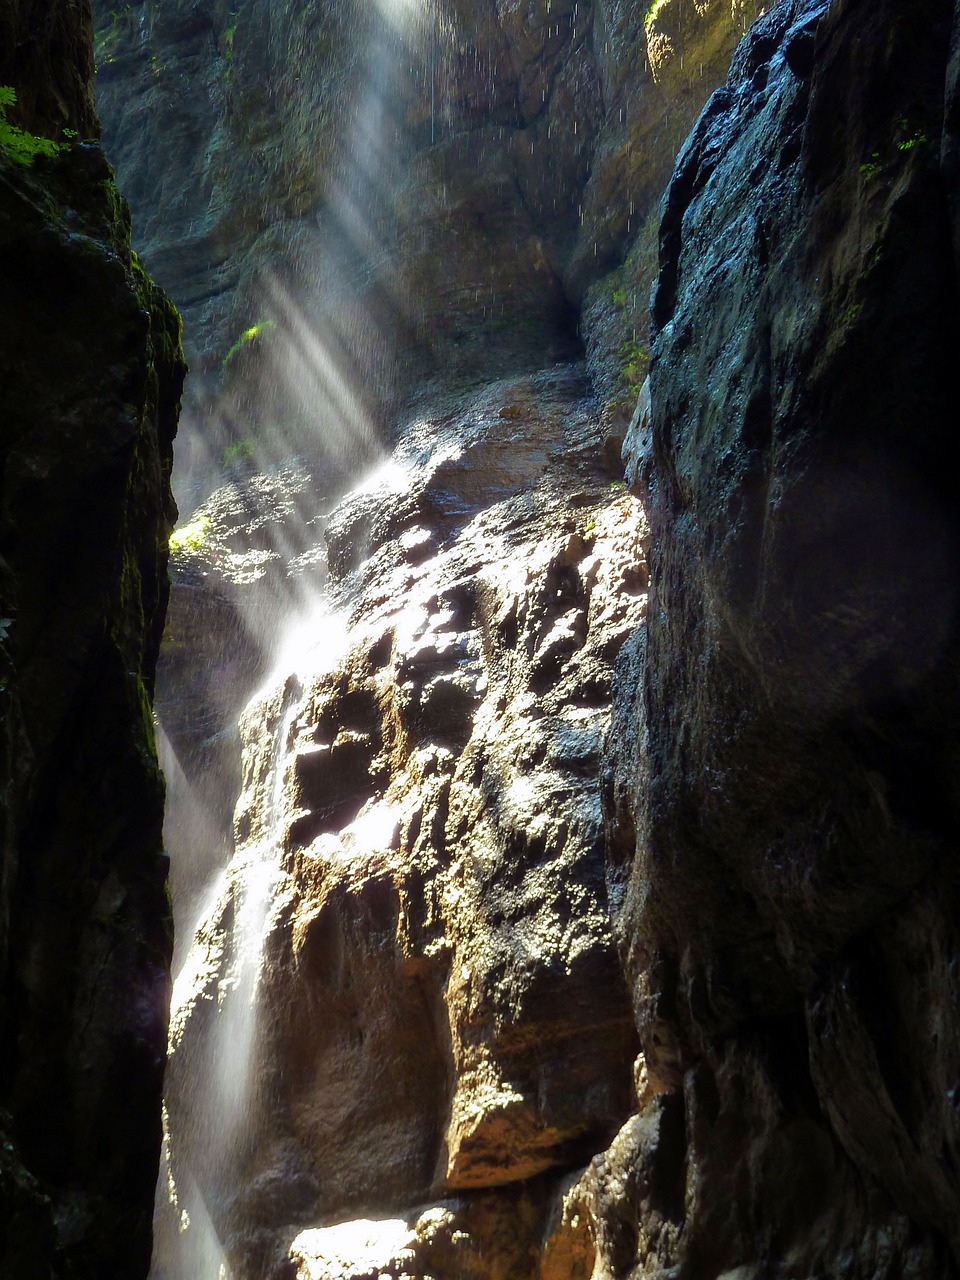 canyon,sun beams,rocks,wet,partnach klamm,germany,water,falls,free pictures, free photos, free images, royalty free, free illustrations, public domain